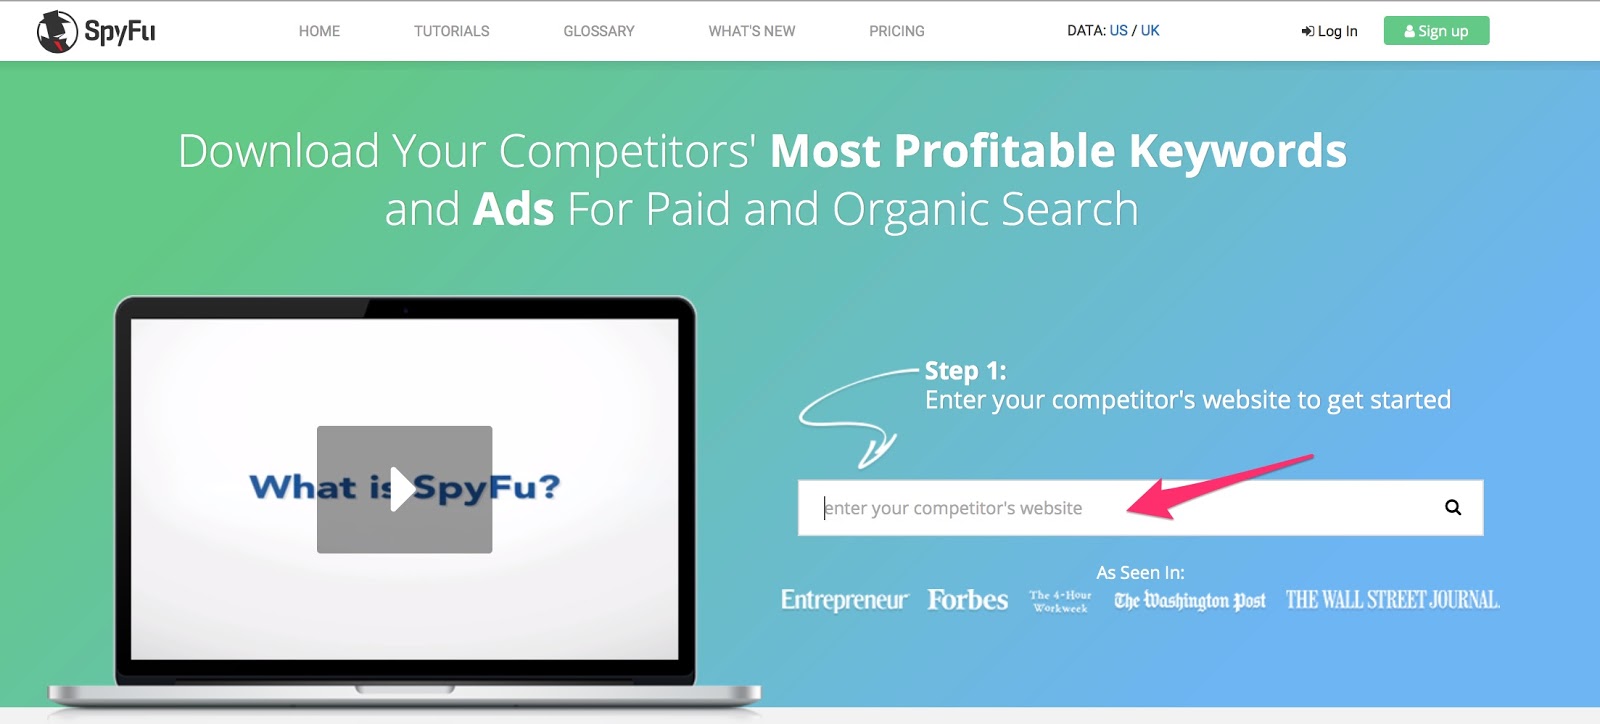 SpyFu Competitor Keyword Research Tools for Adwords PPC SEO